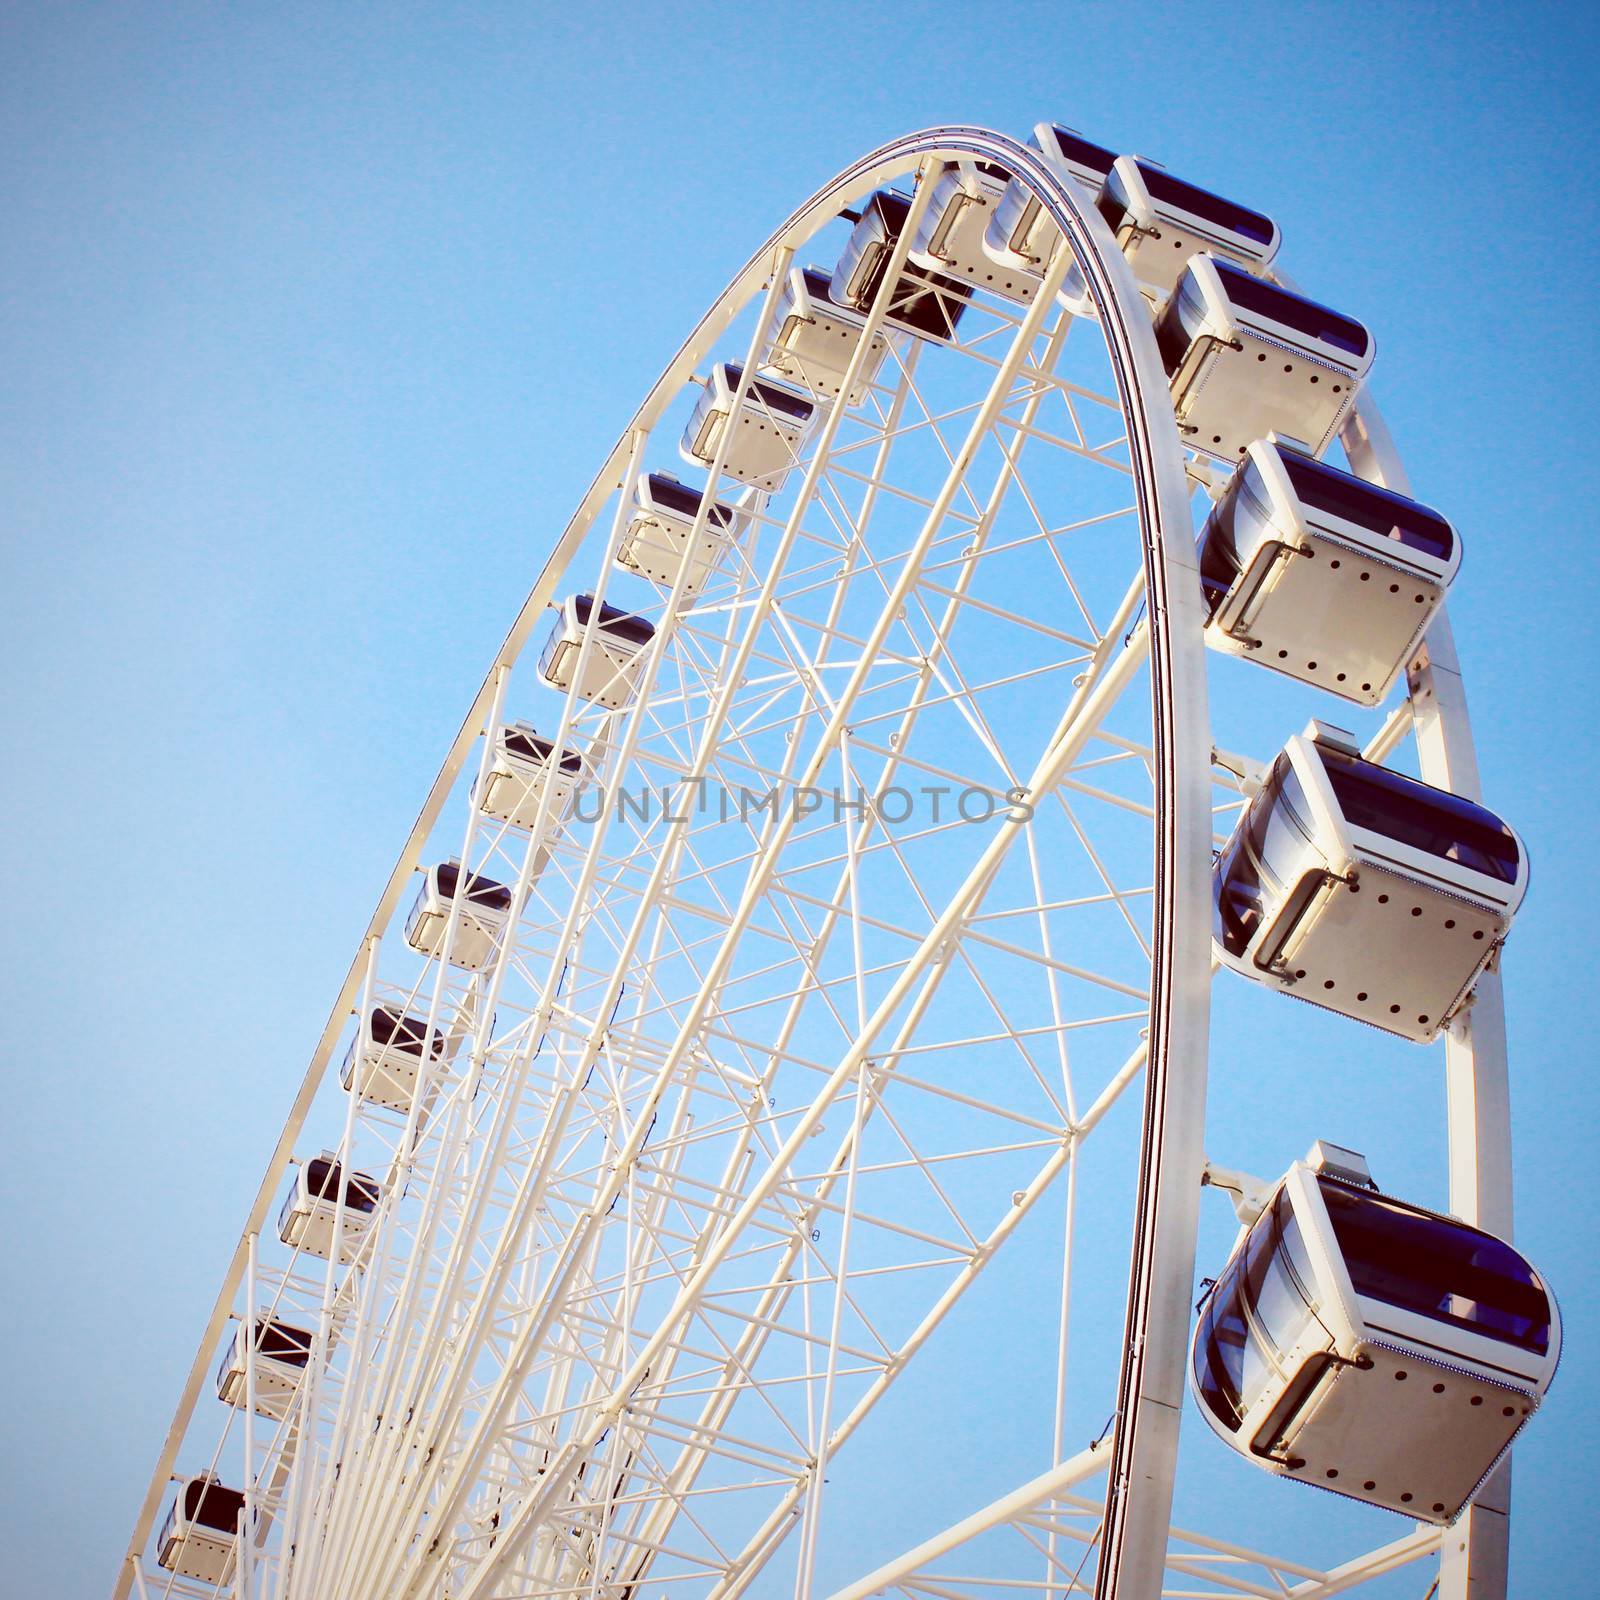 Ferris wheel with clear blue sky, retro filter effect by nuchylee